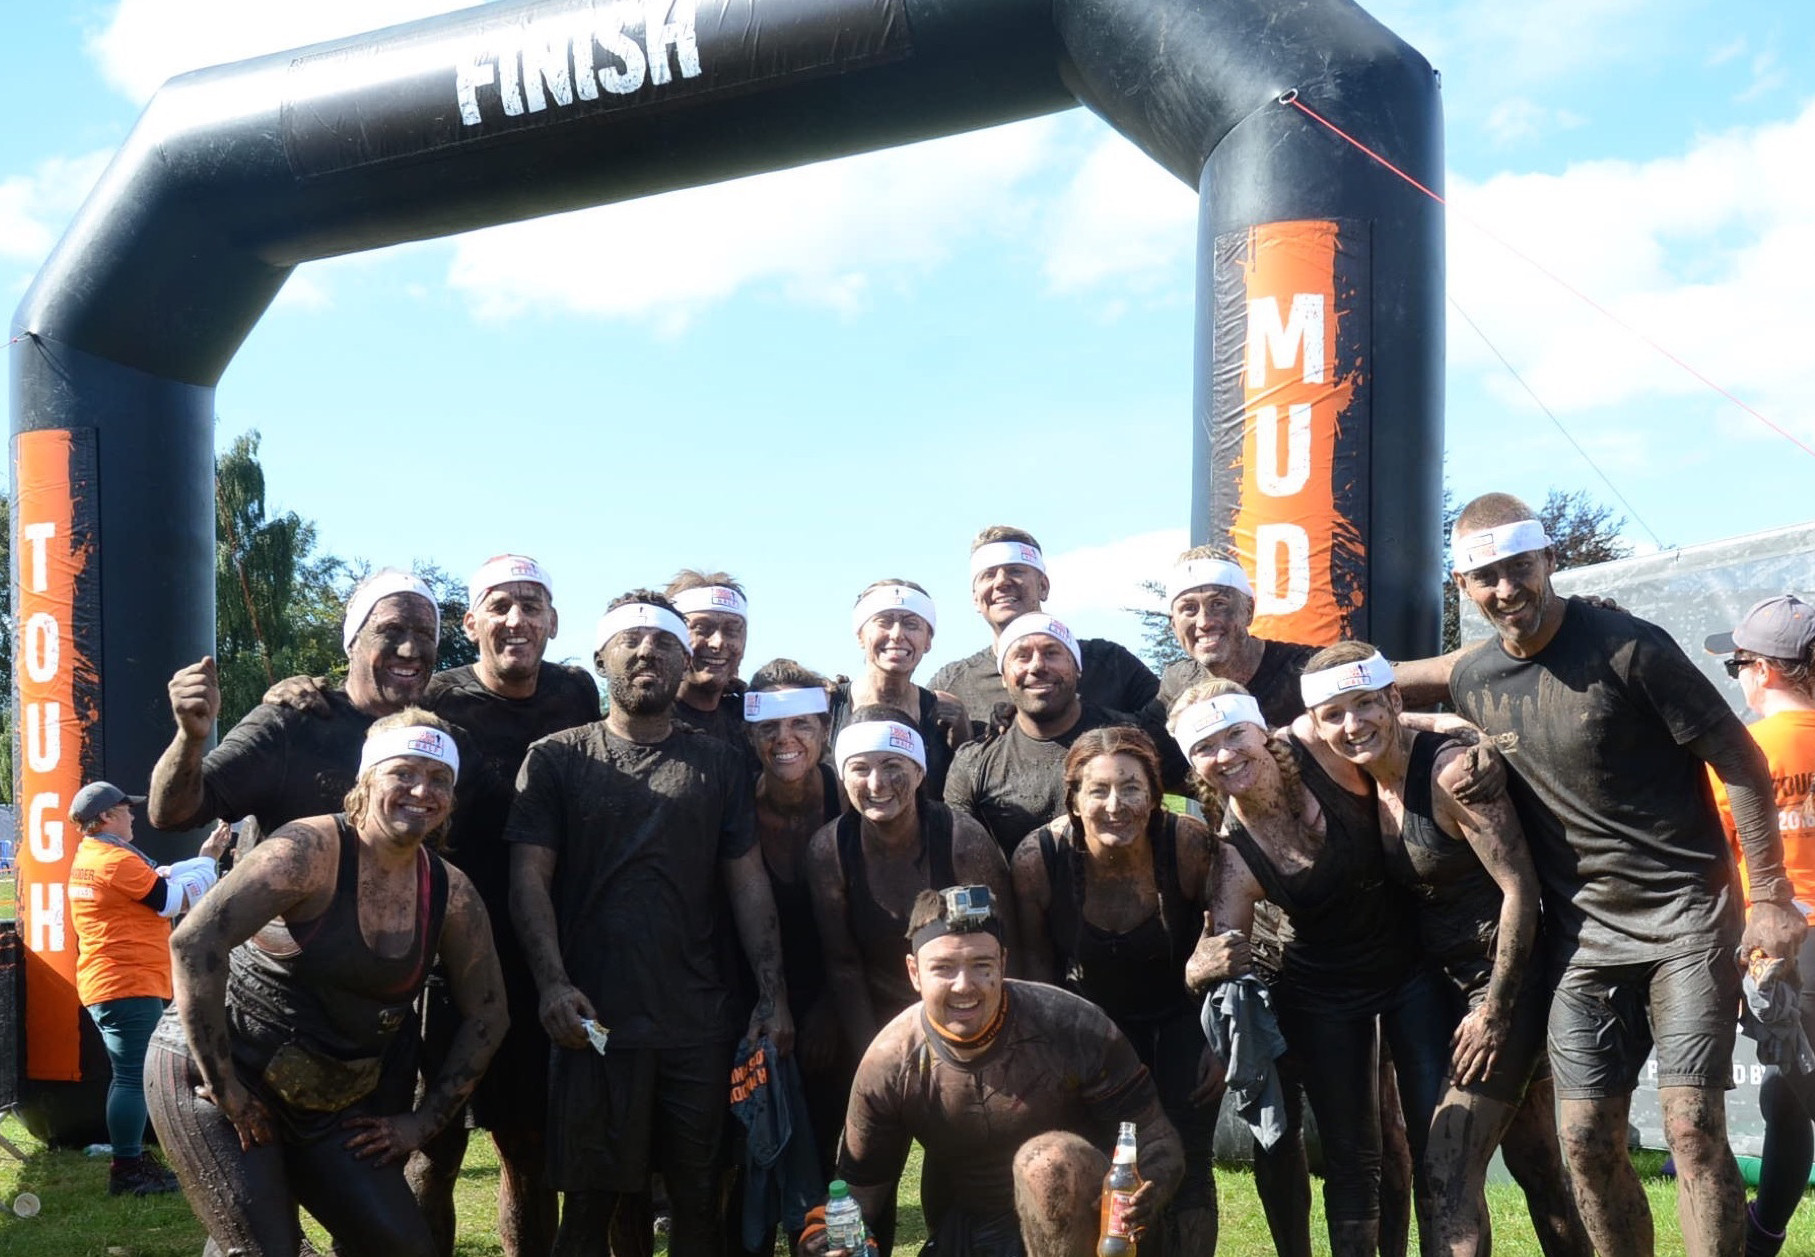 The Lyreco team after successfully finishing the Tough Mudder